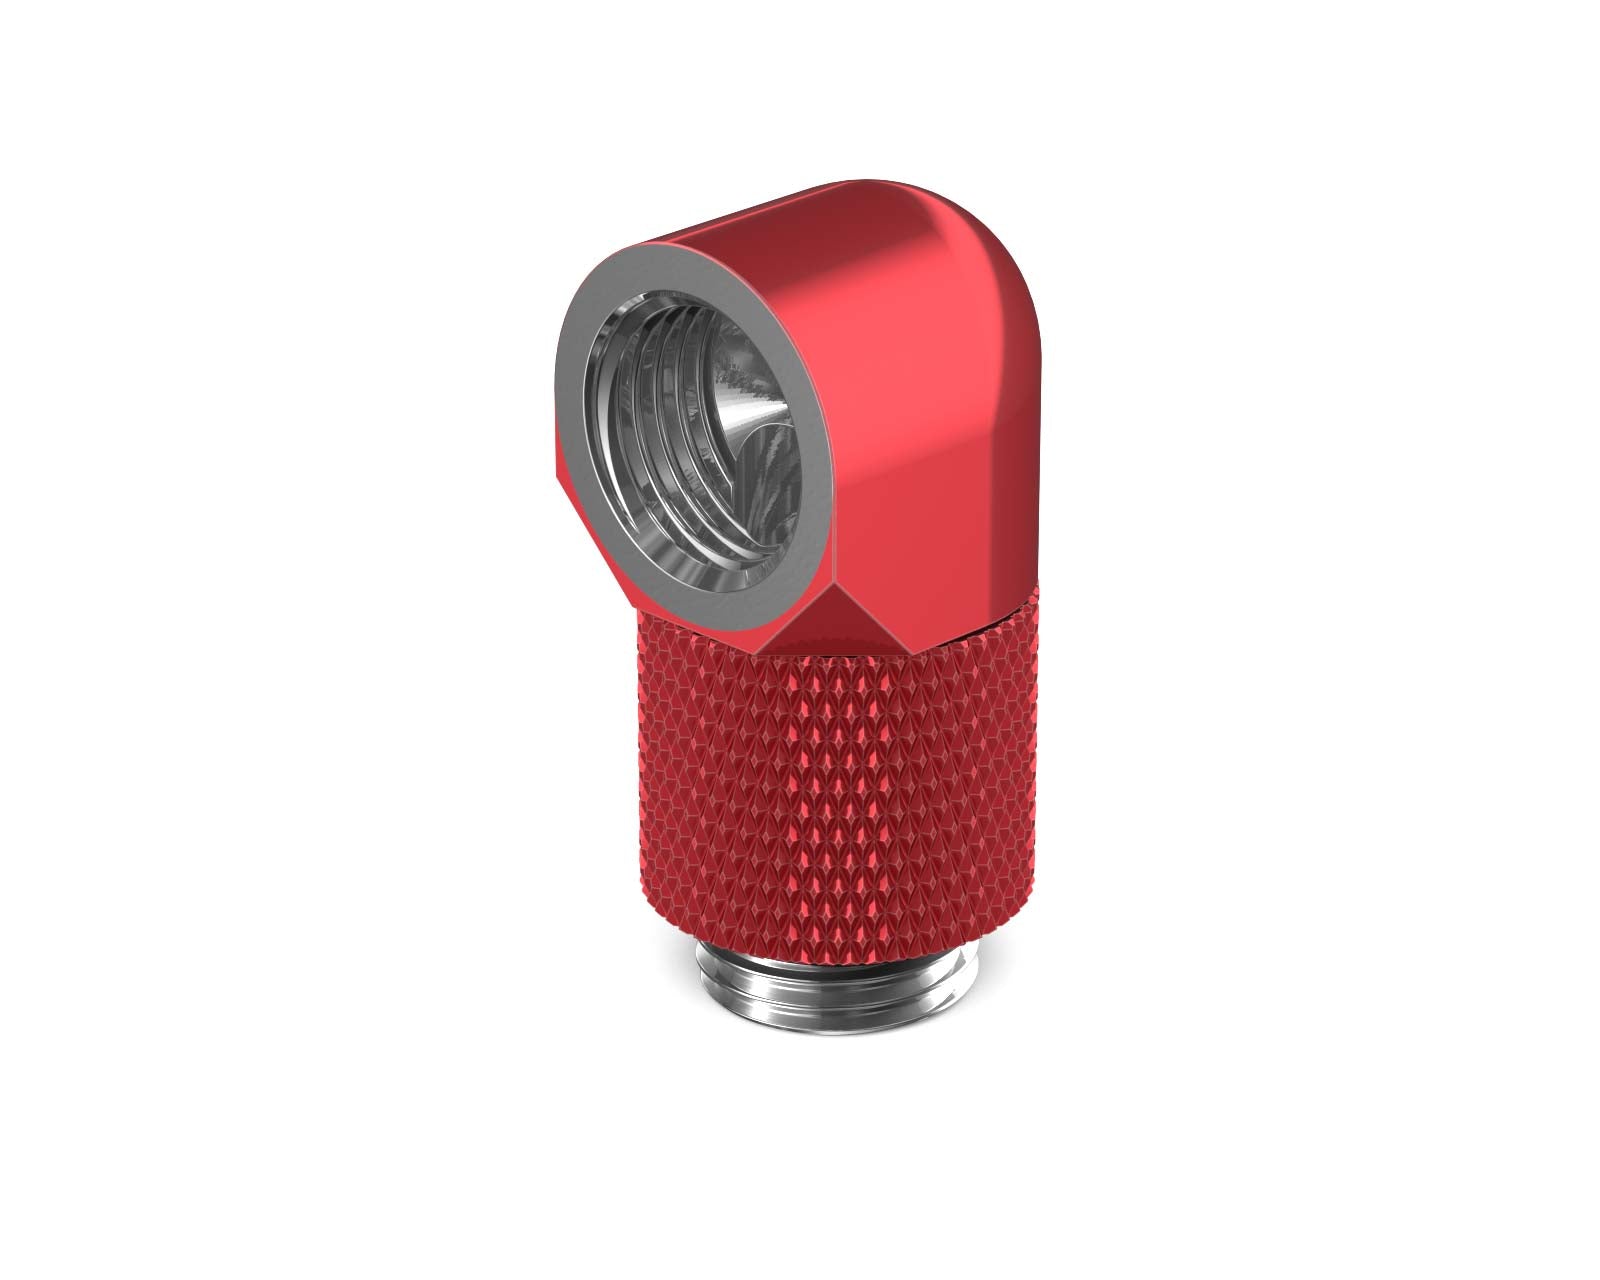 BSTOCK:PrimoChill Male to Female G 1/4in. 90 Degree SX Rotary 15mm Extension Elbow Fitting - Candy Red - PrimoChill - KEEPING IT COOL